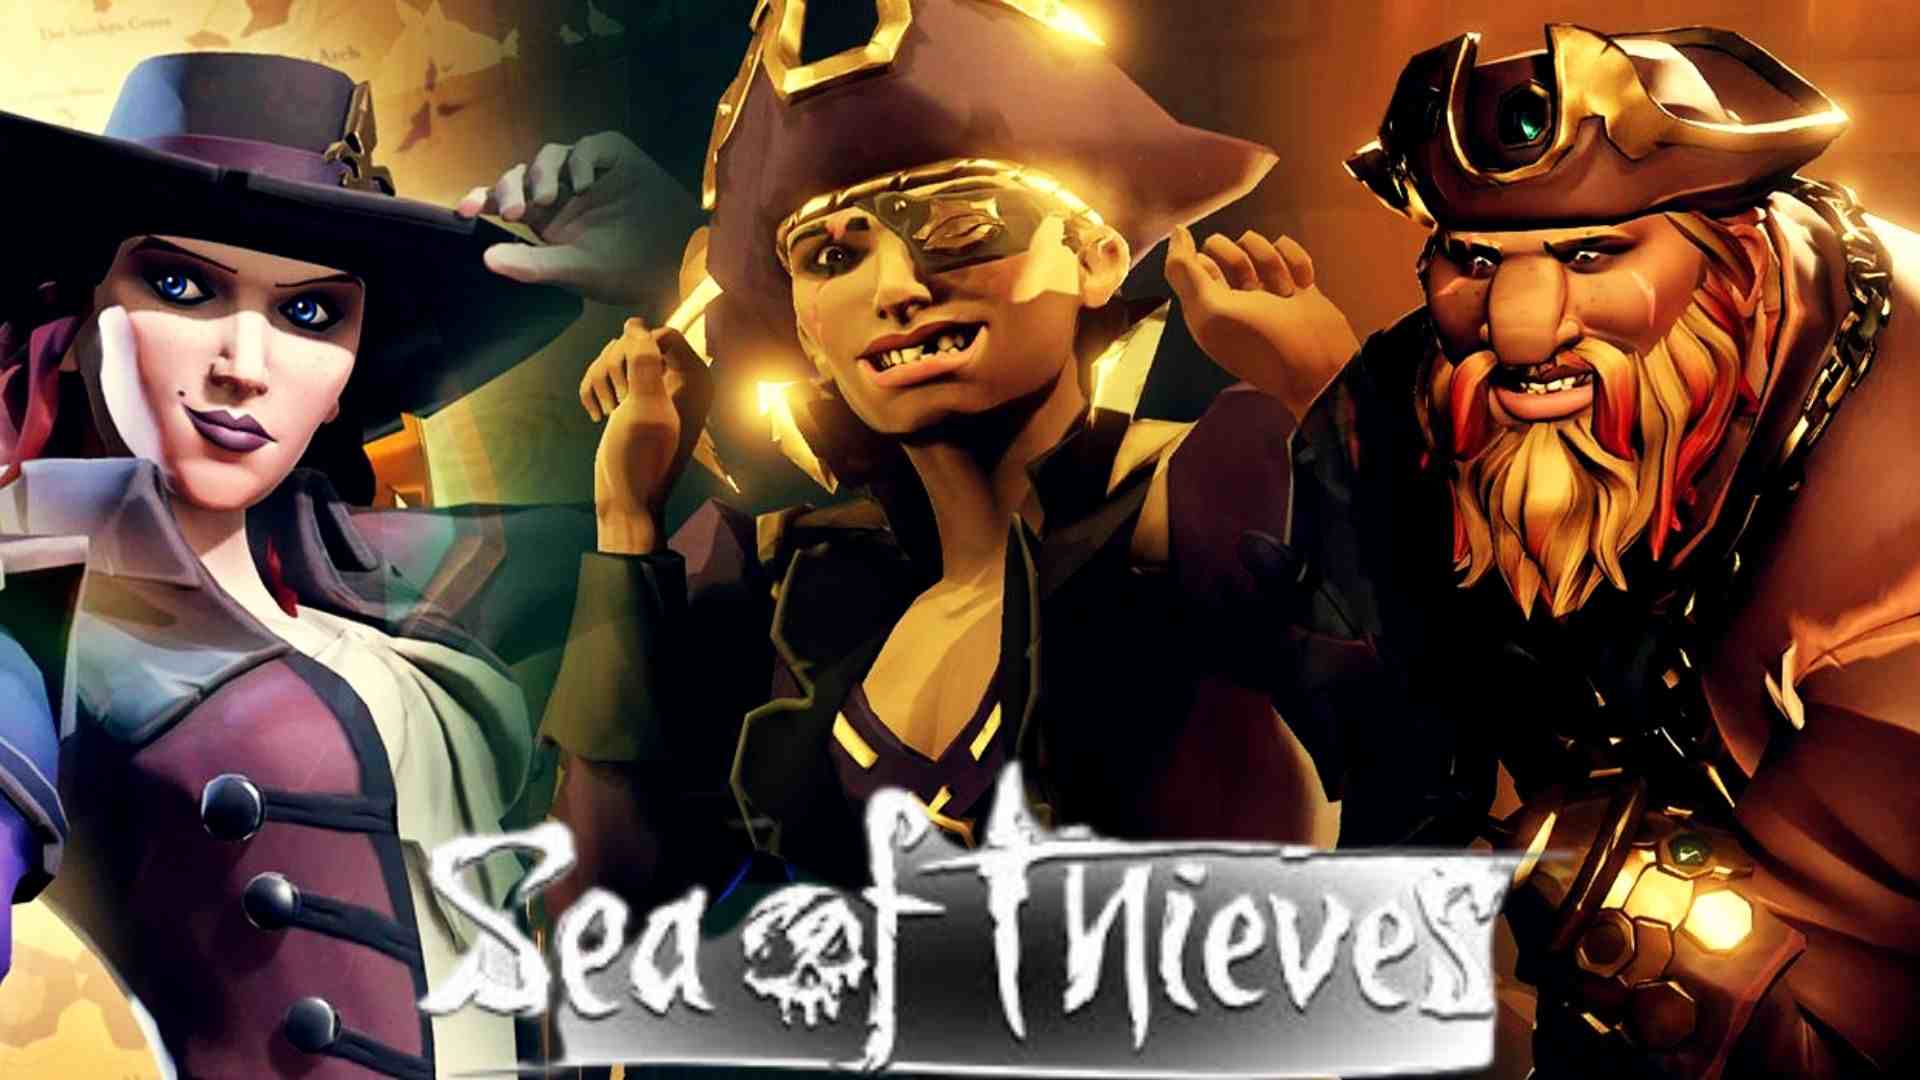 Sea of Thieves Age Rating | Sea of Thieves Parents Guide | 2018